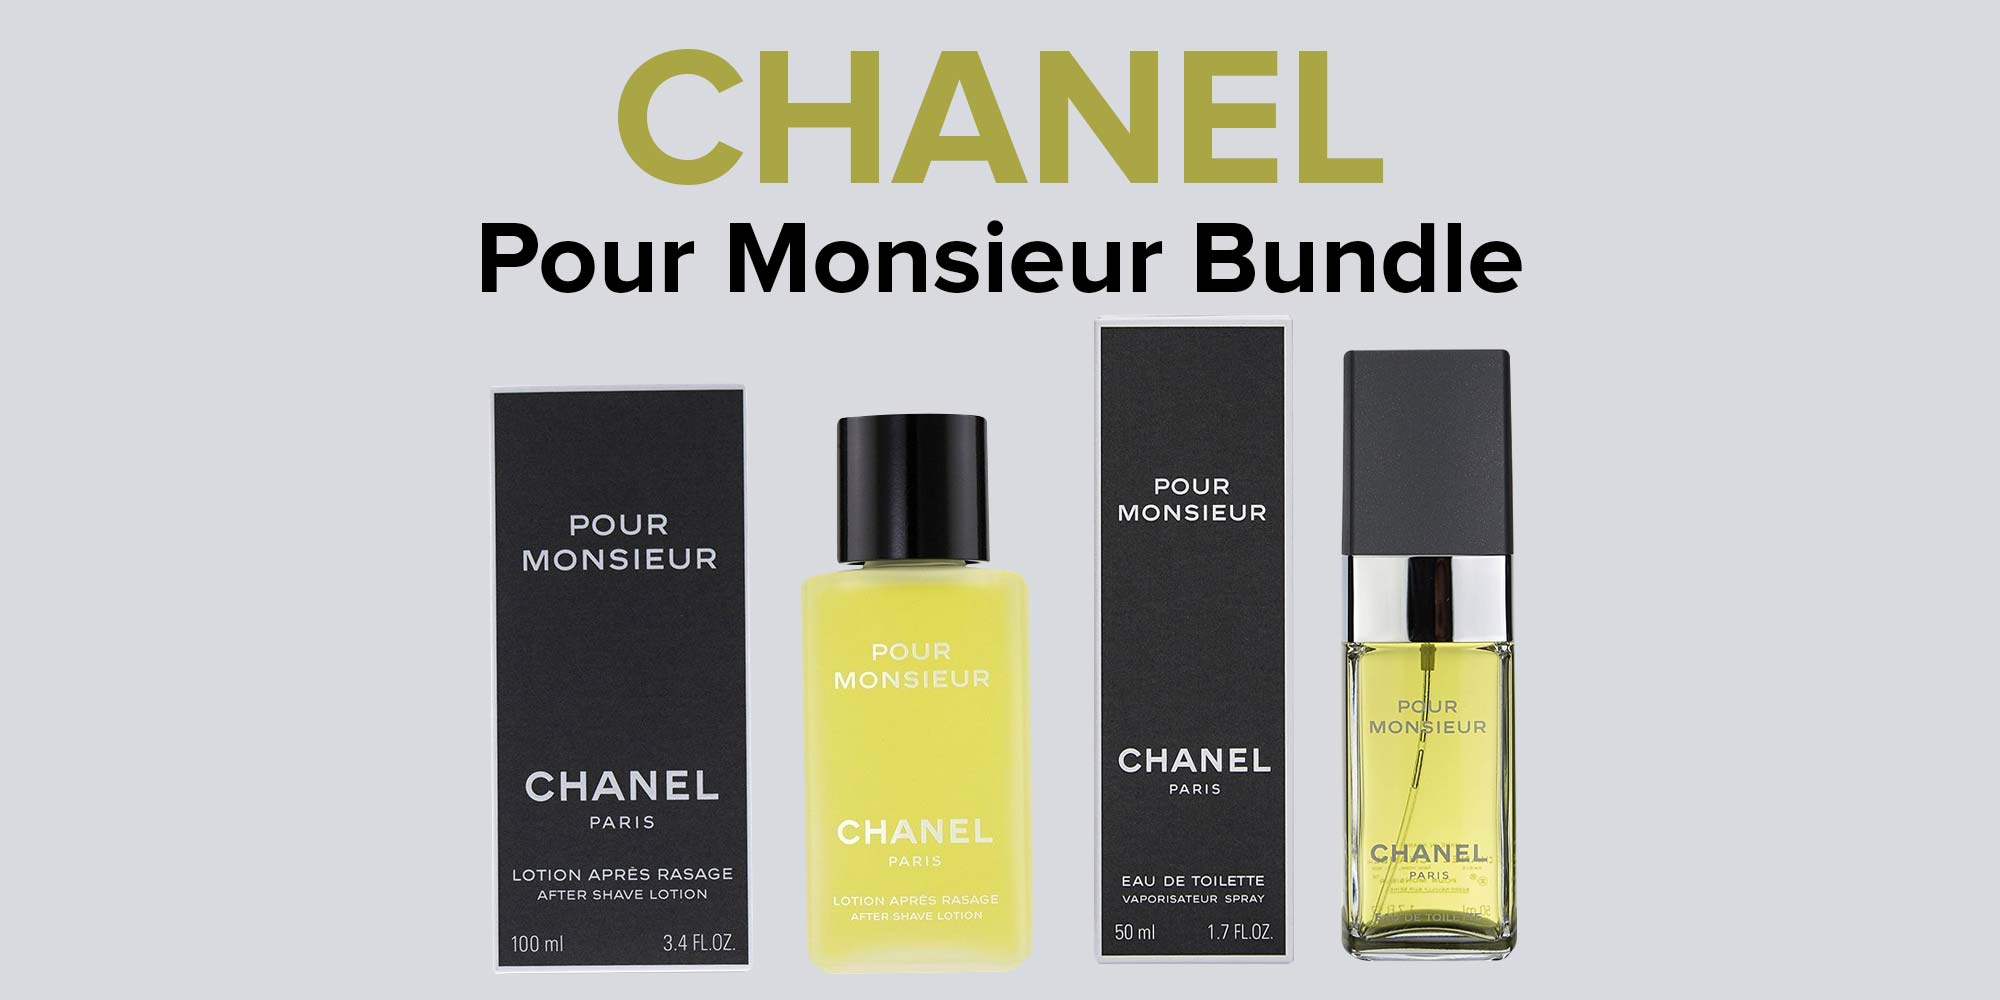 CHANEL Chanel Bundle Offer of Pour Monsieur EDT 50 ML+ After Shave